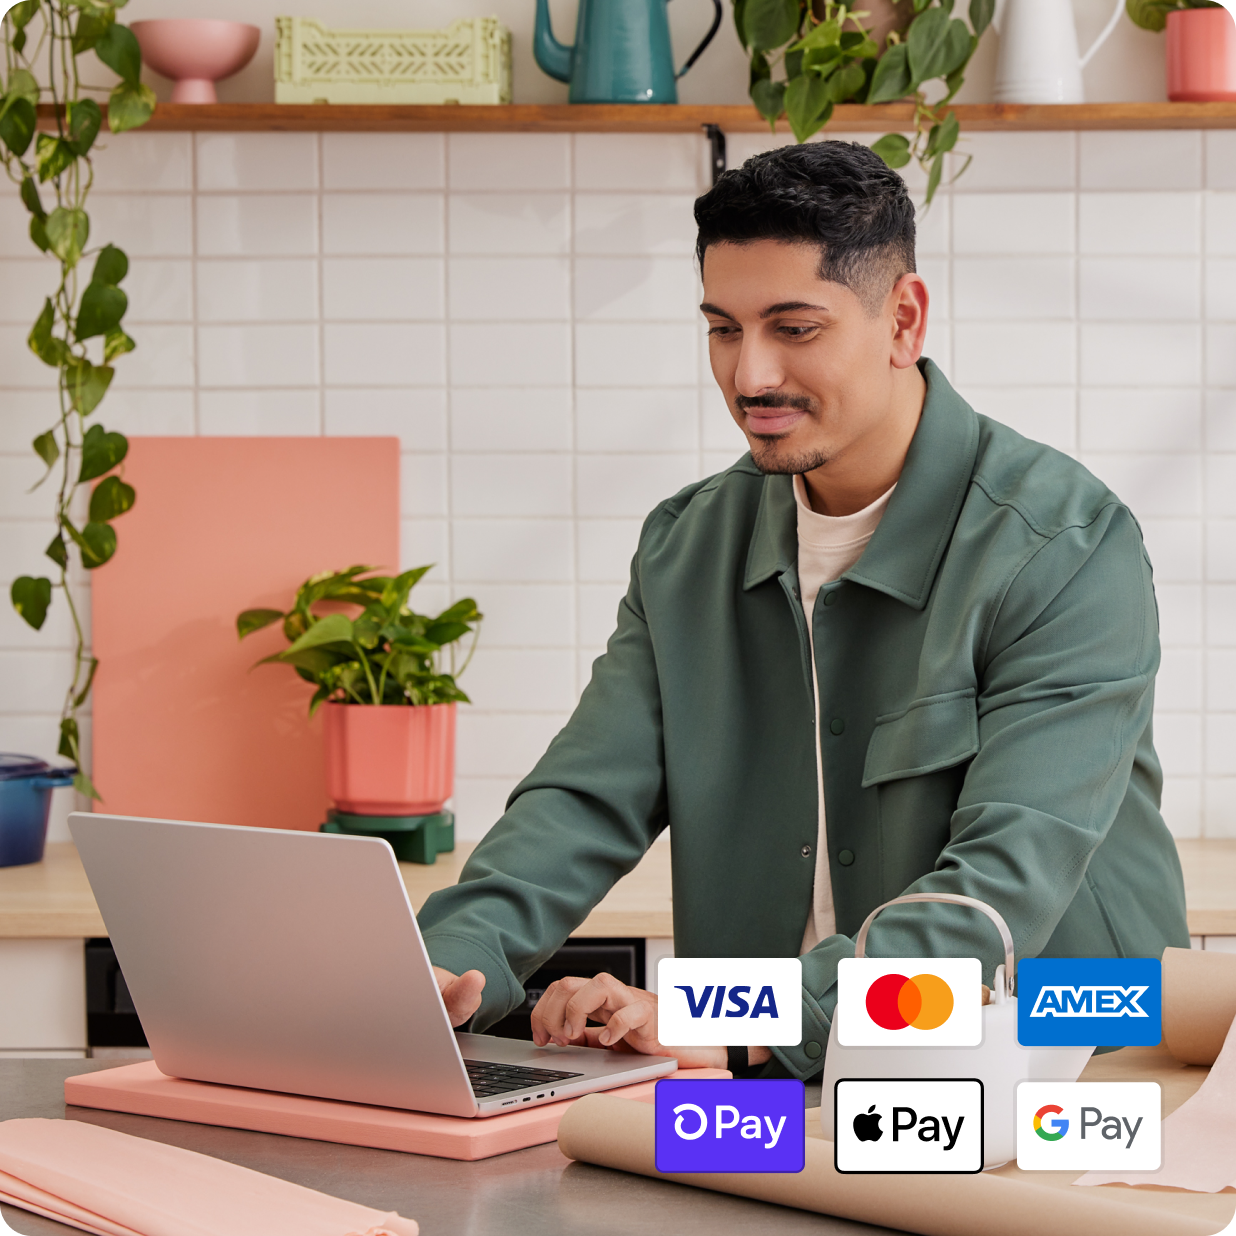 Customer paying on a laptop with Visa, Mastercard, American Express, Shop Pay, Apple Pay, Google Pay, and more